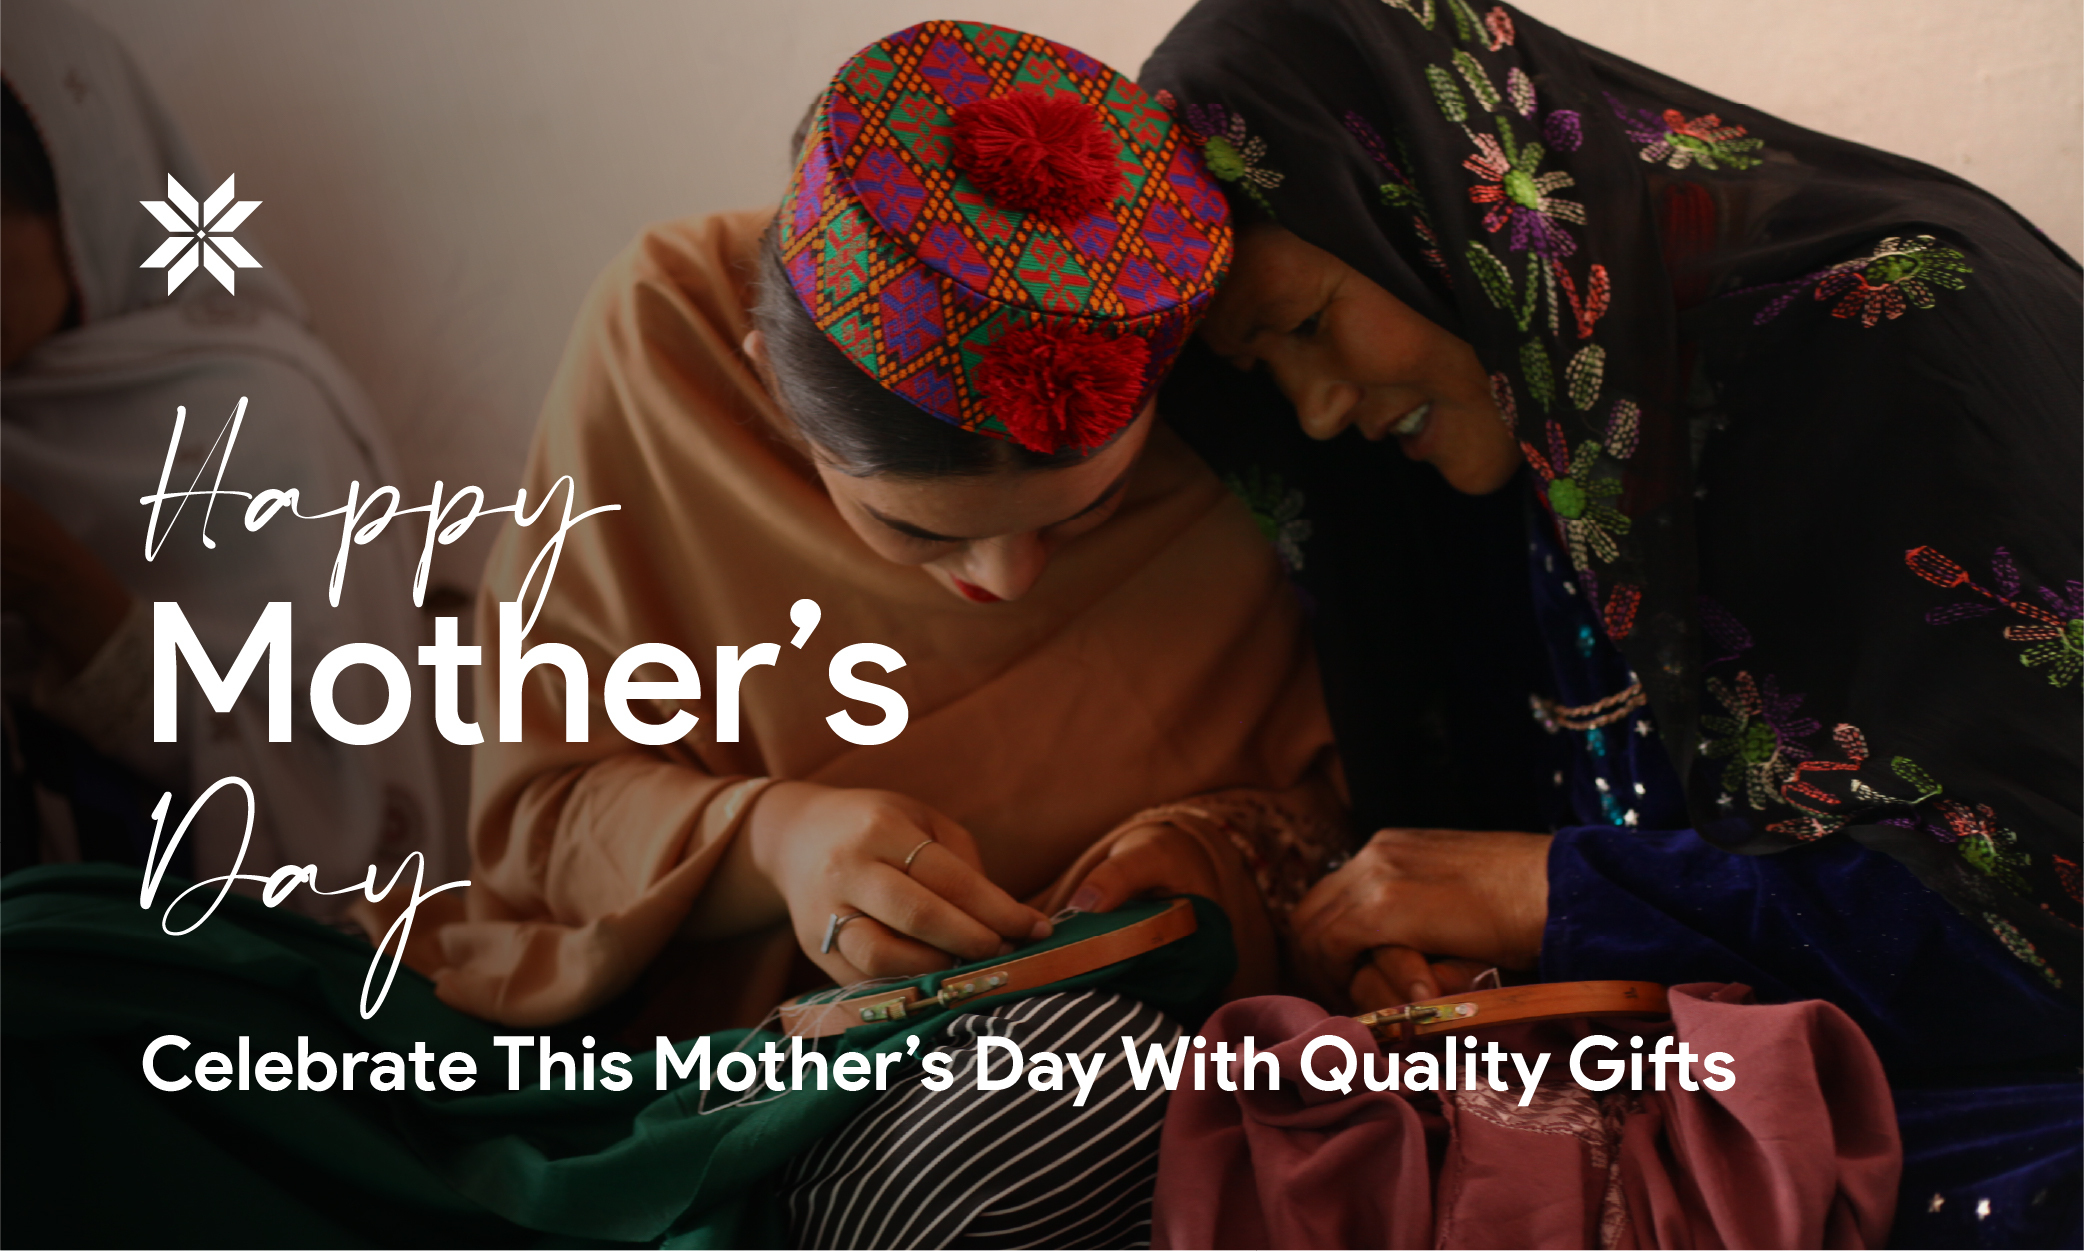 Pamper the Mother in Your Life : Handmade Gift Ideas for Mother's Day